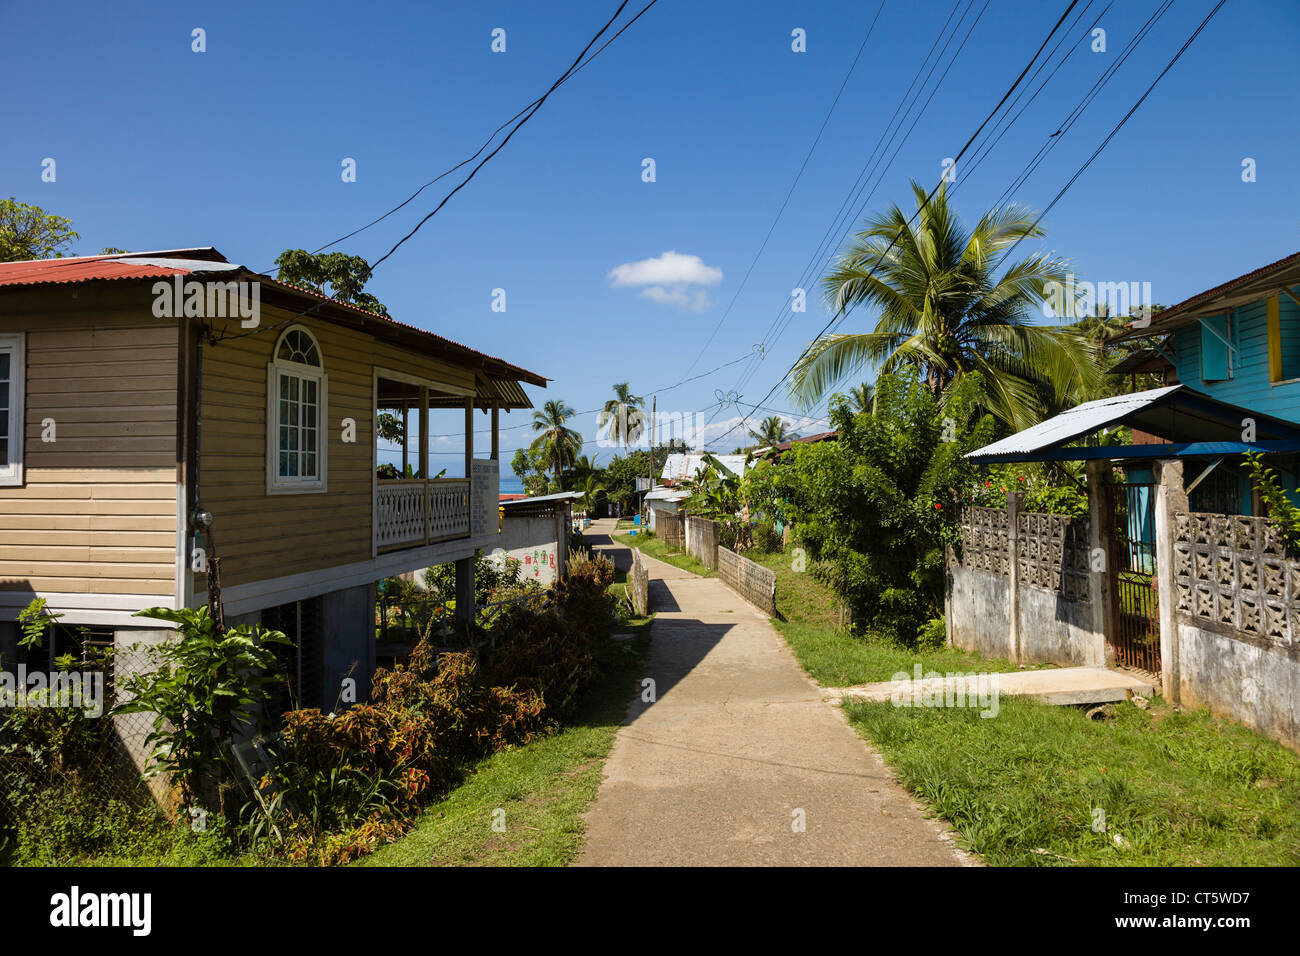 Elevated wooden houses and footpath in the Afro-Caribbean town of Old Bank on Isla Bastimentos, Bocas del Toro, Panama. Stock Photo